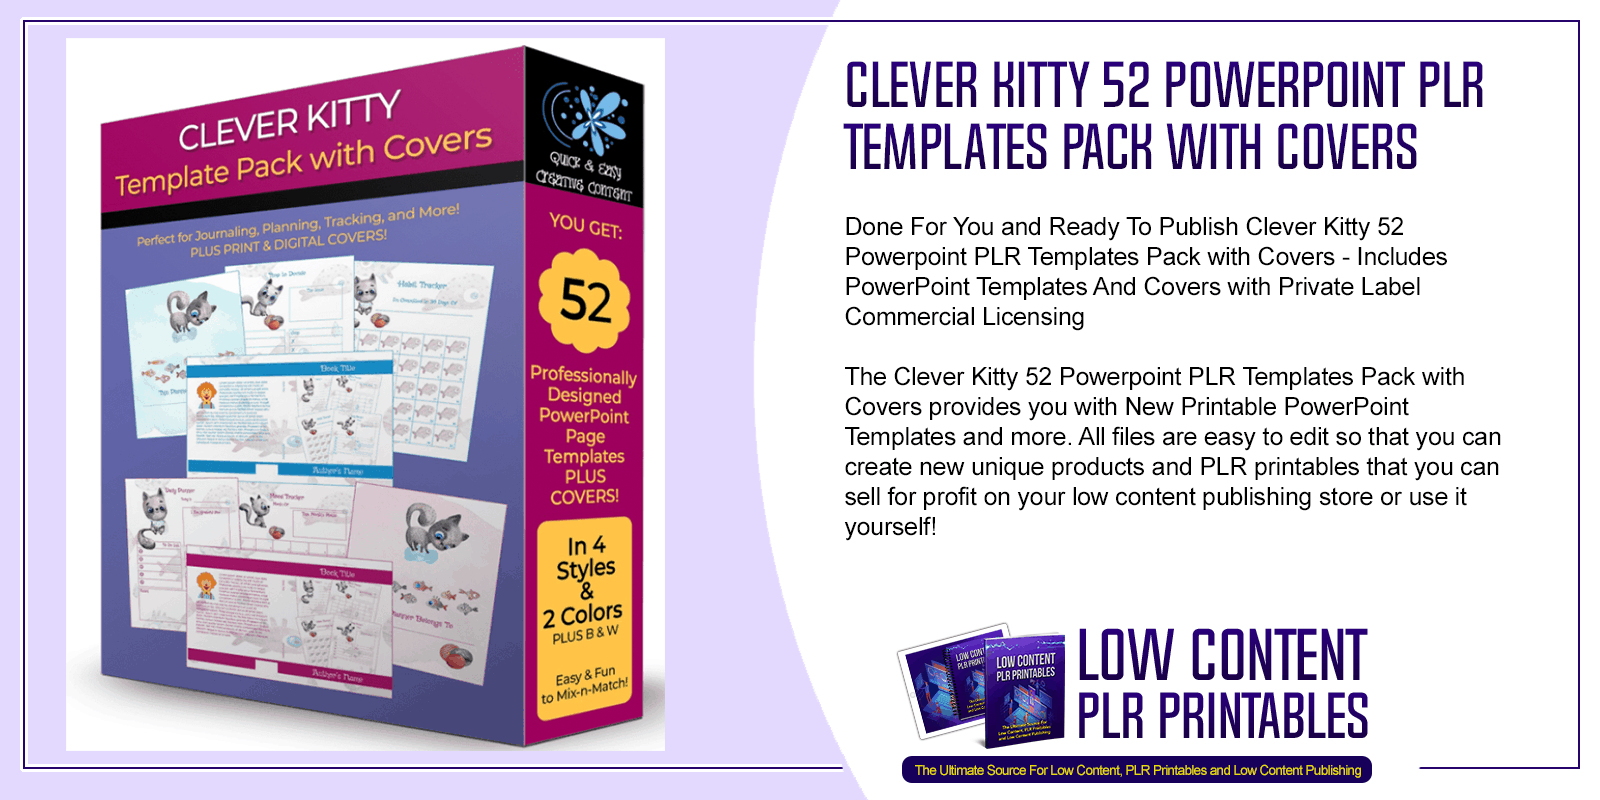 Clever Kitty 52 Powerpoint PLR Templates Pack with Covers